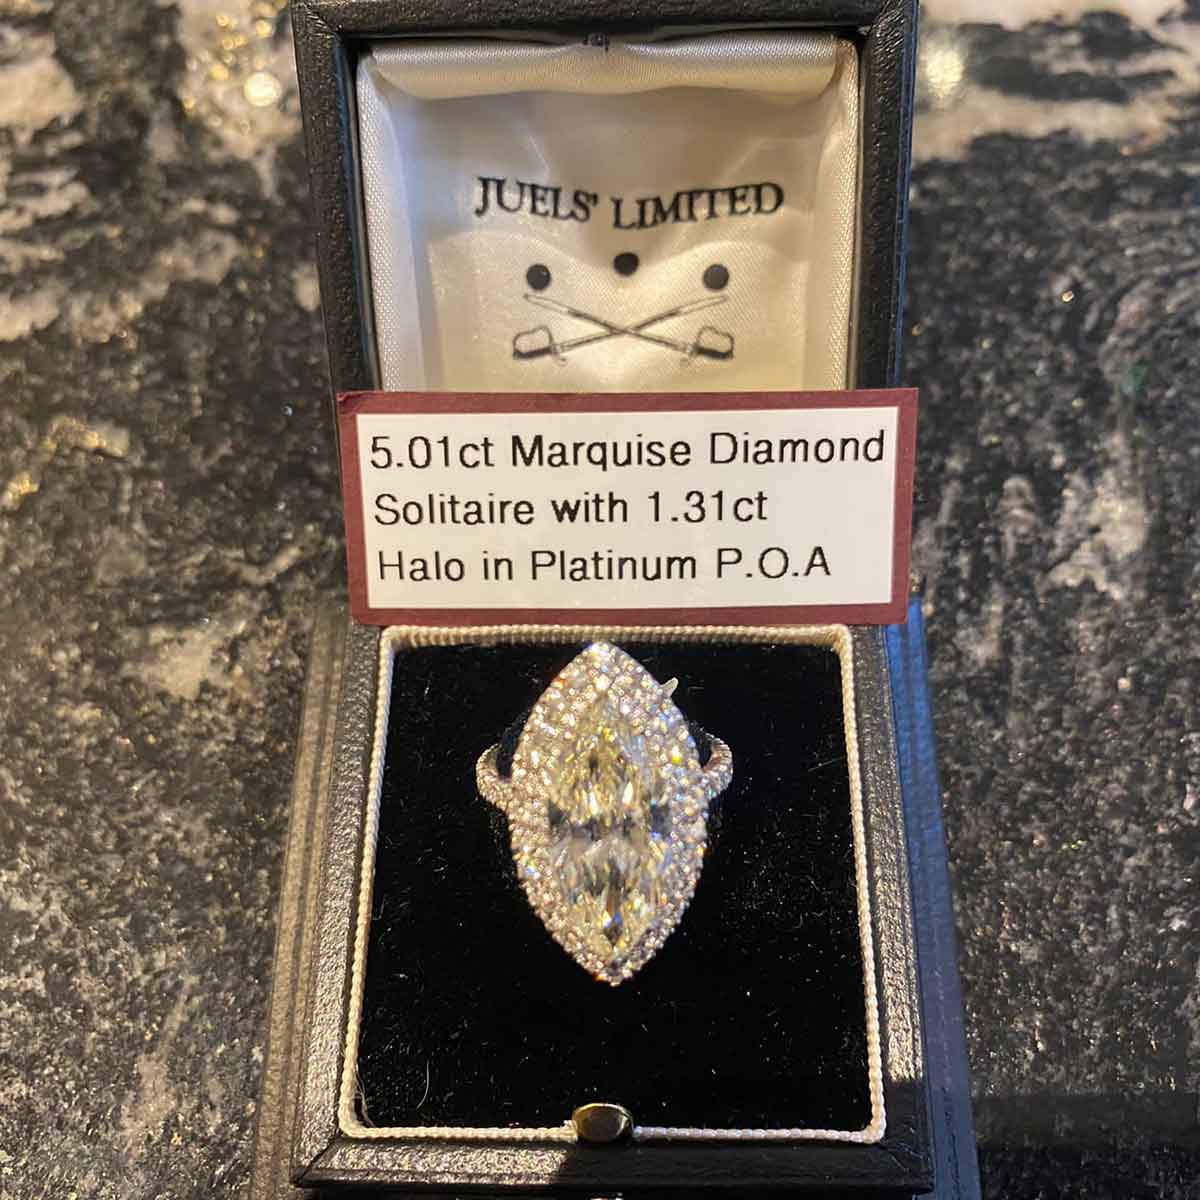 Juels Limited Marquise Diamond Solitaire